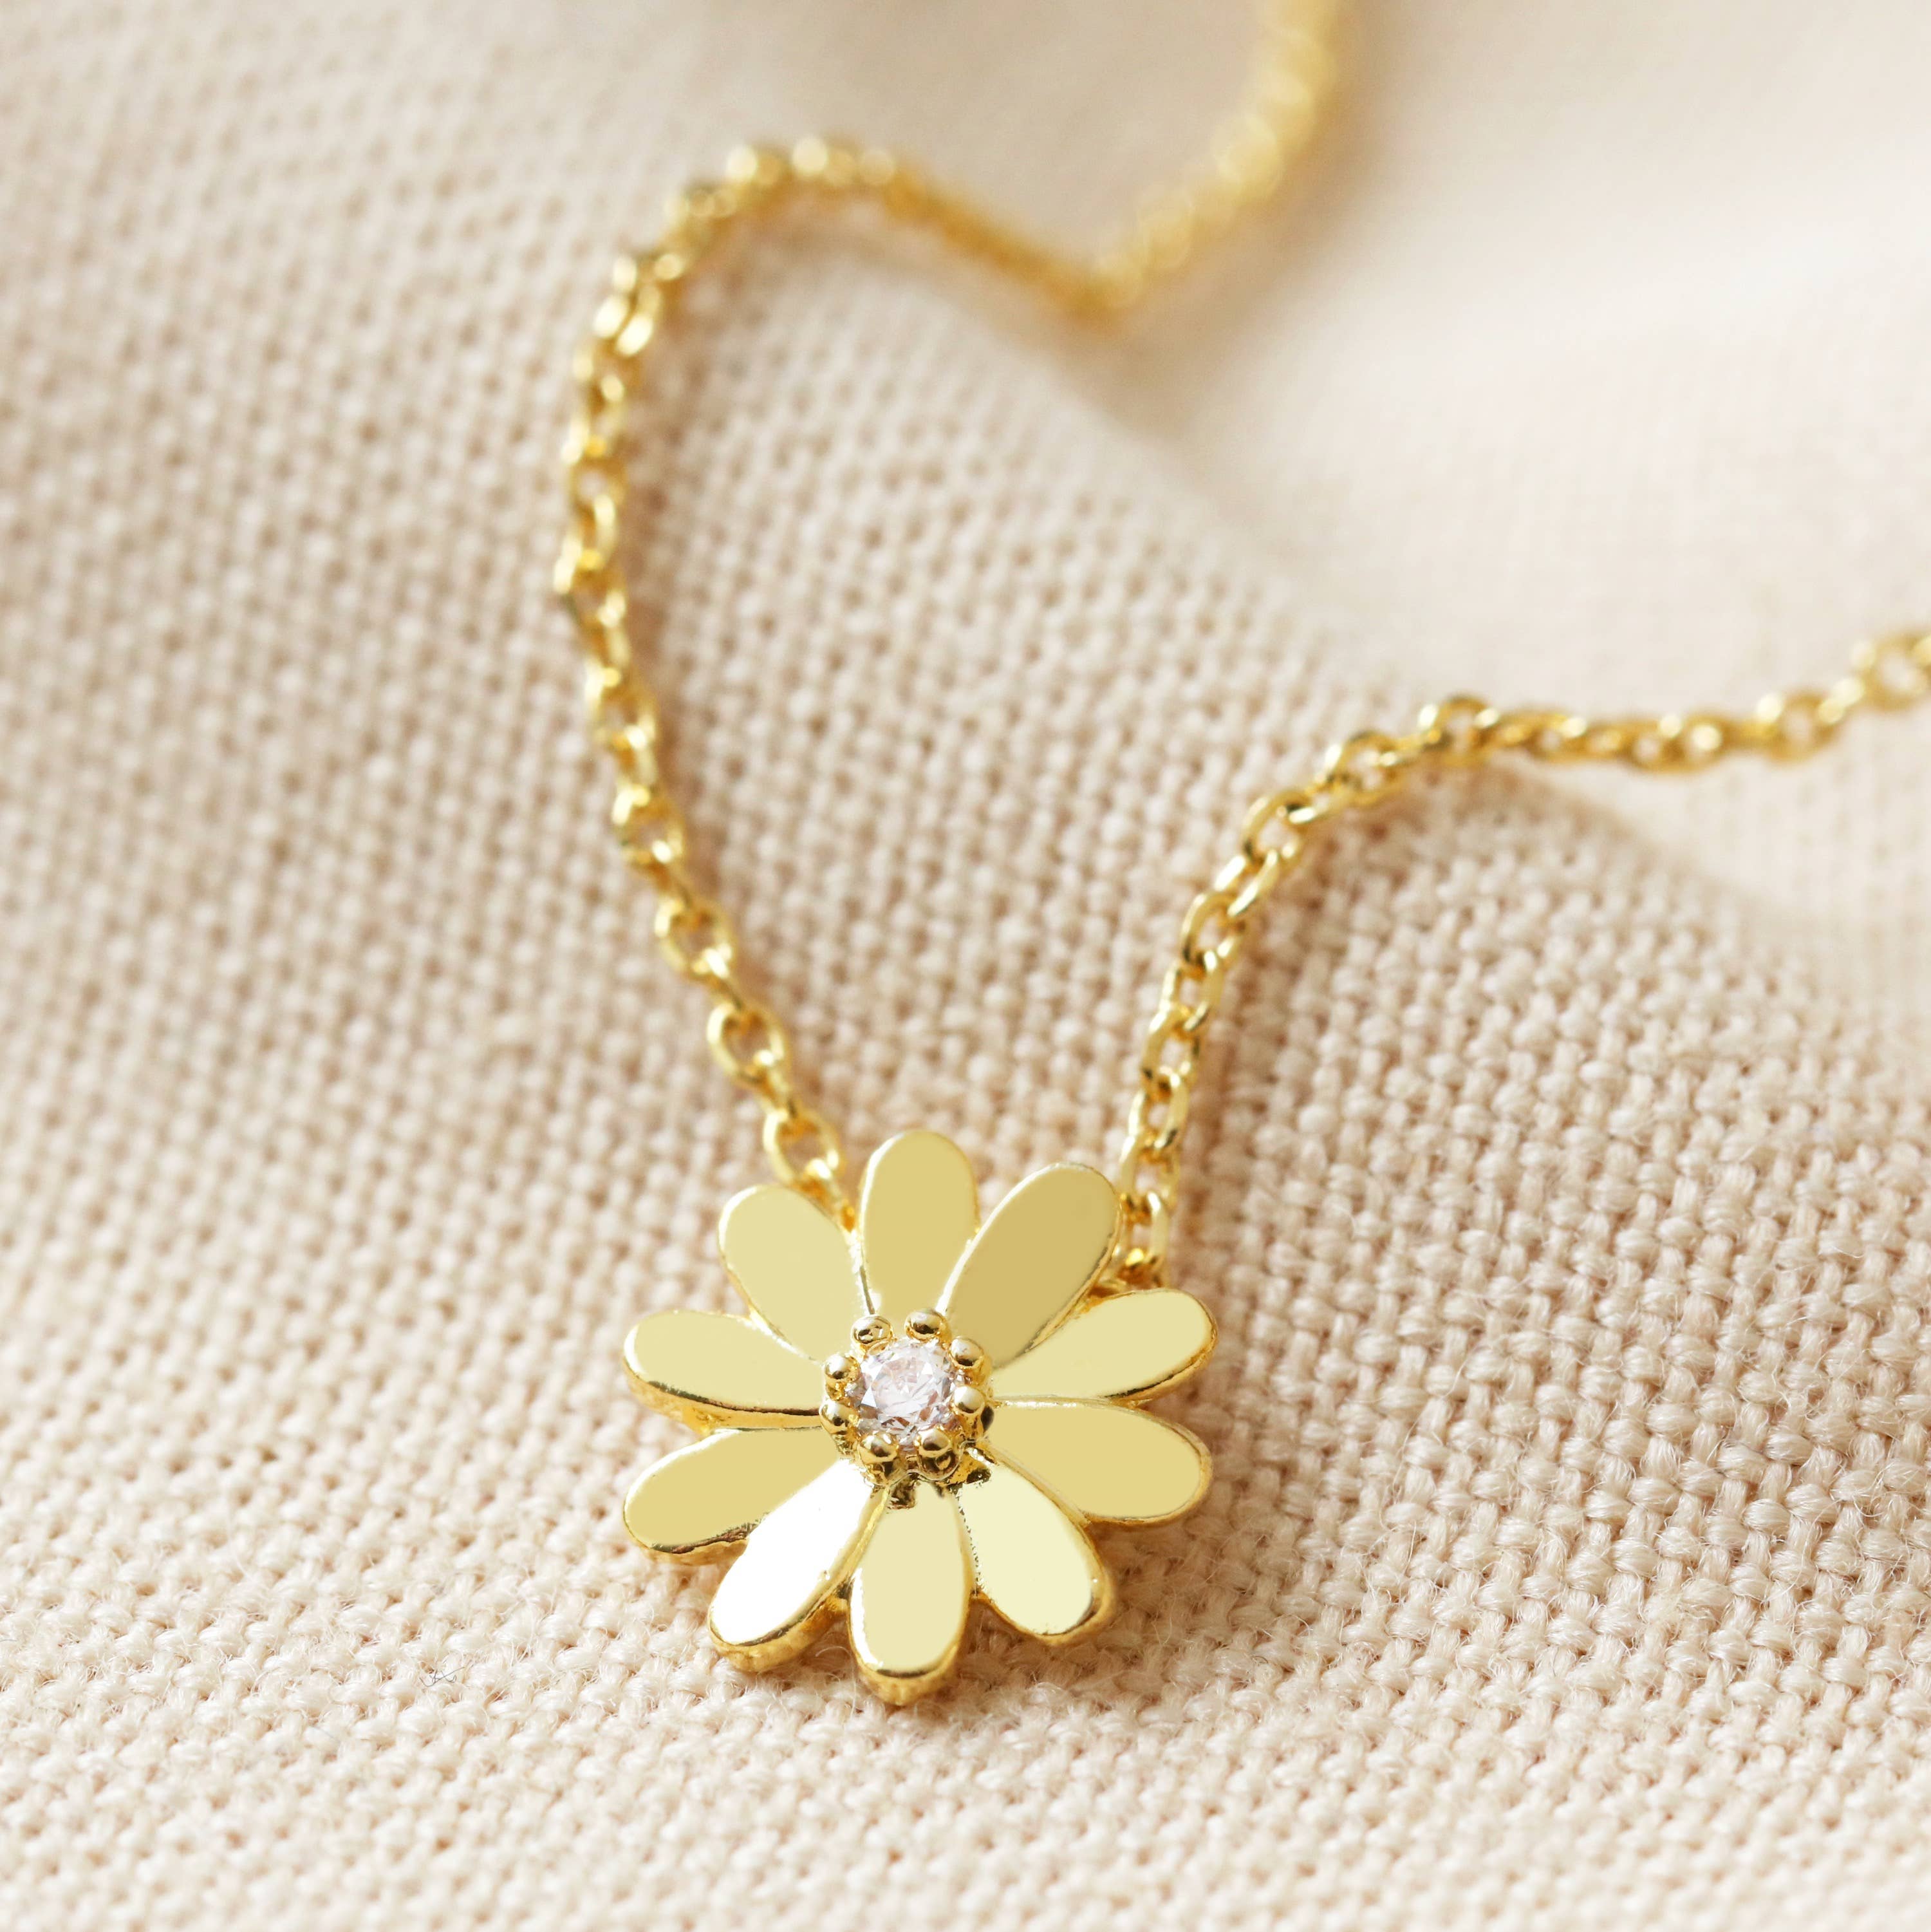 Daisy Charm Necklace in Gold Shop Ravel